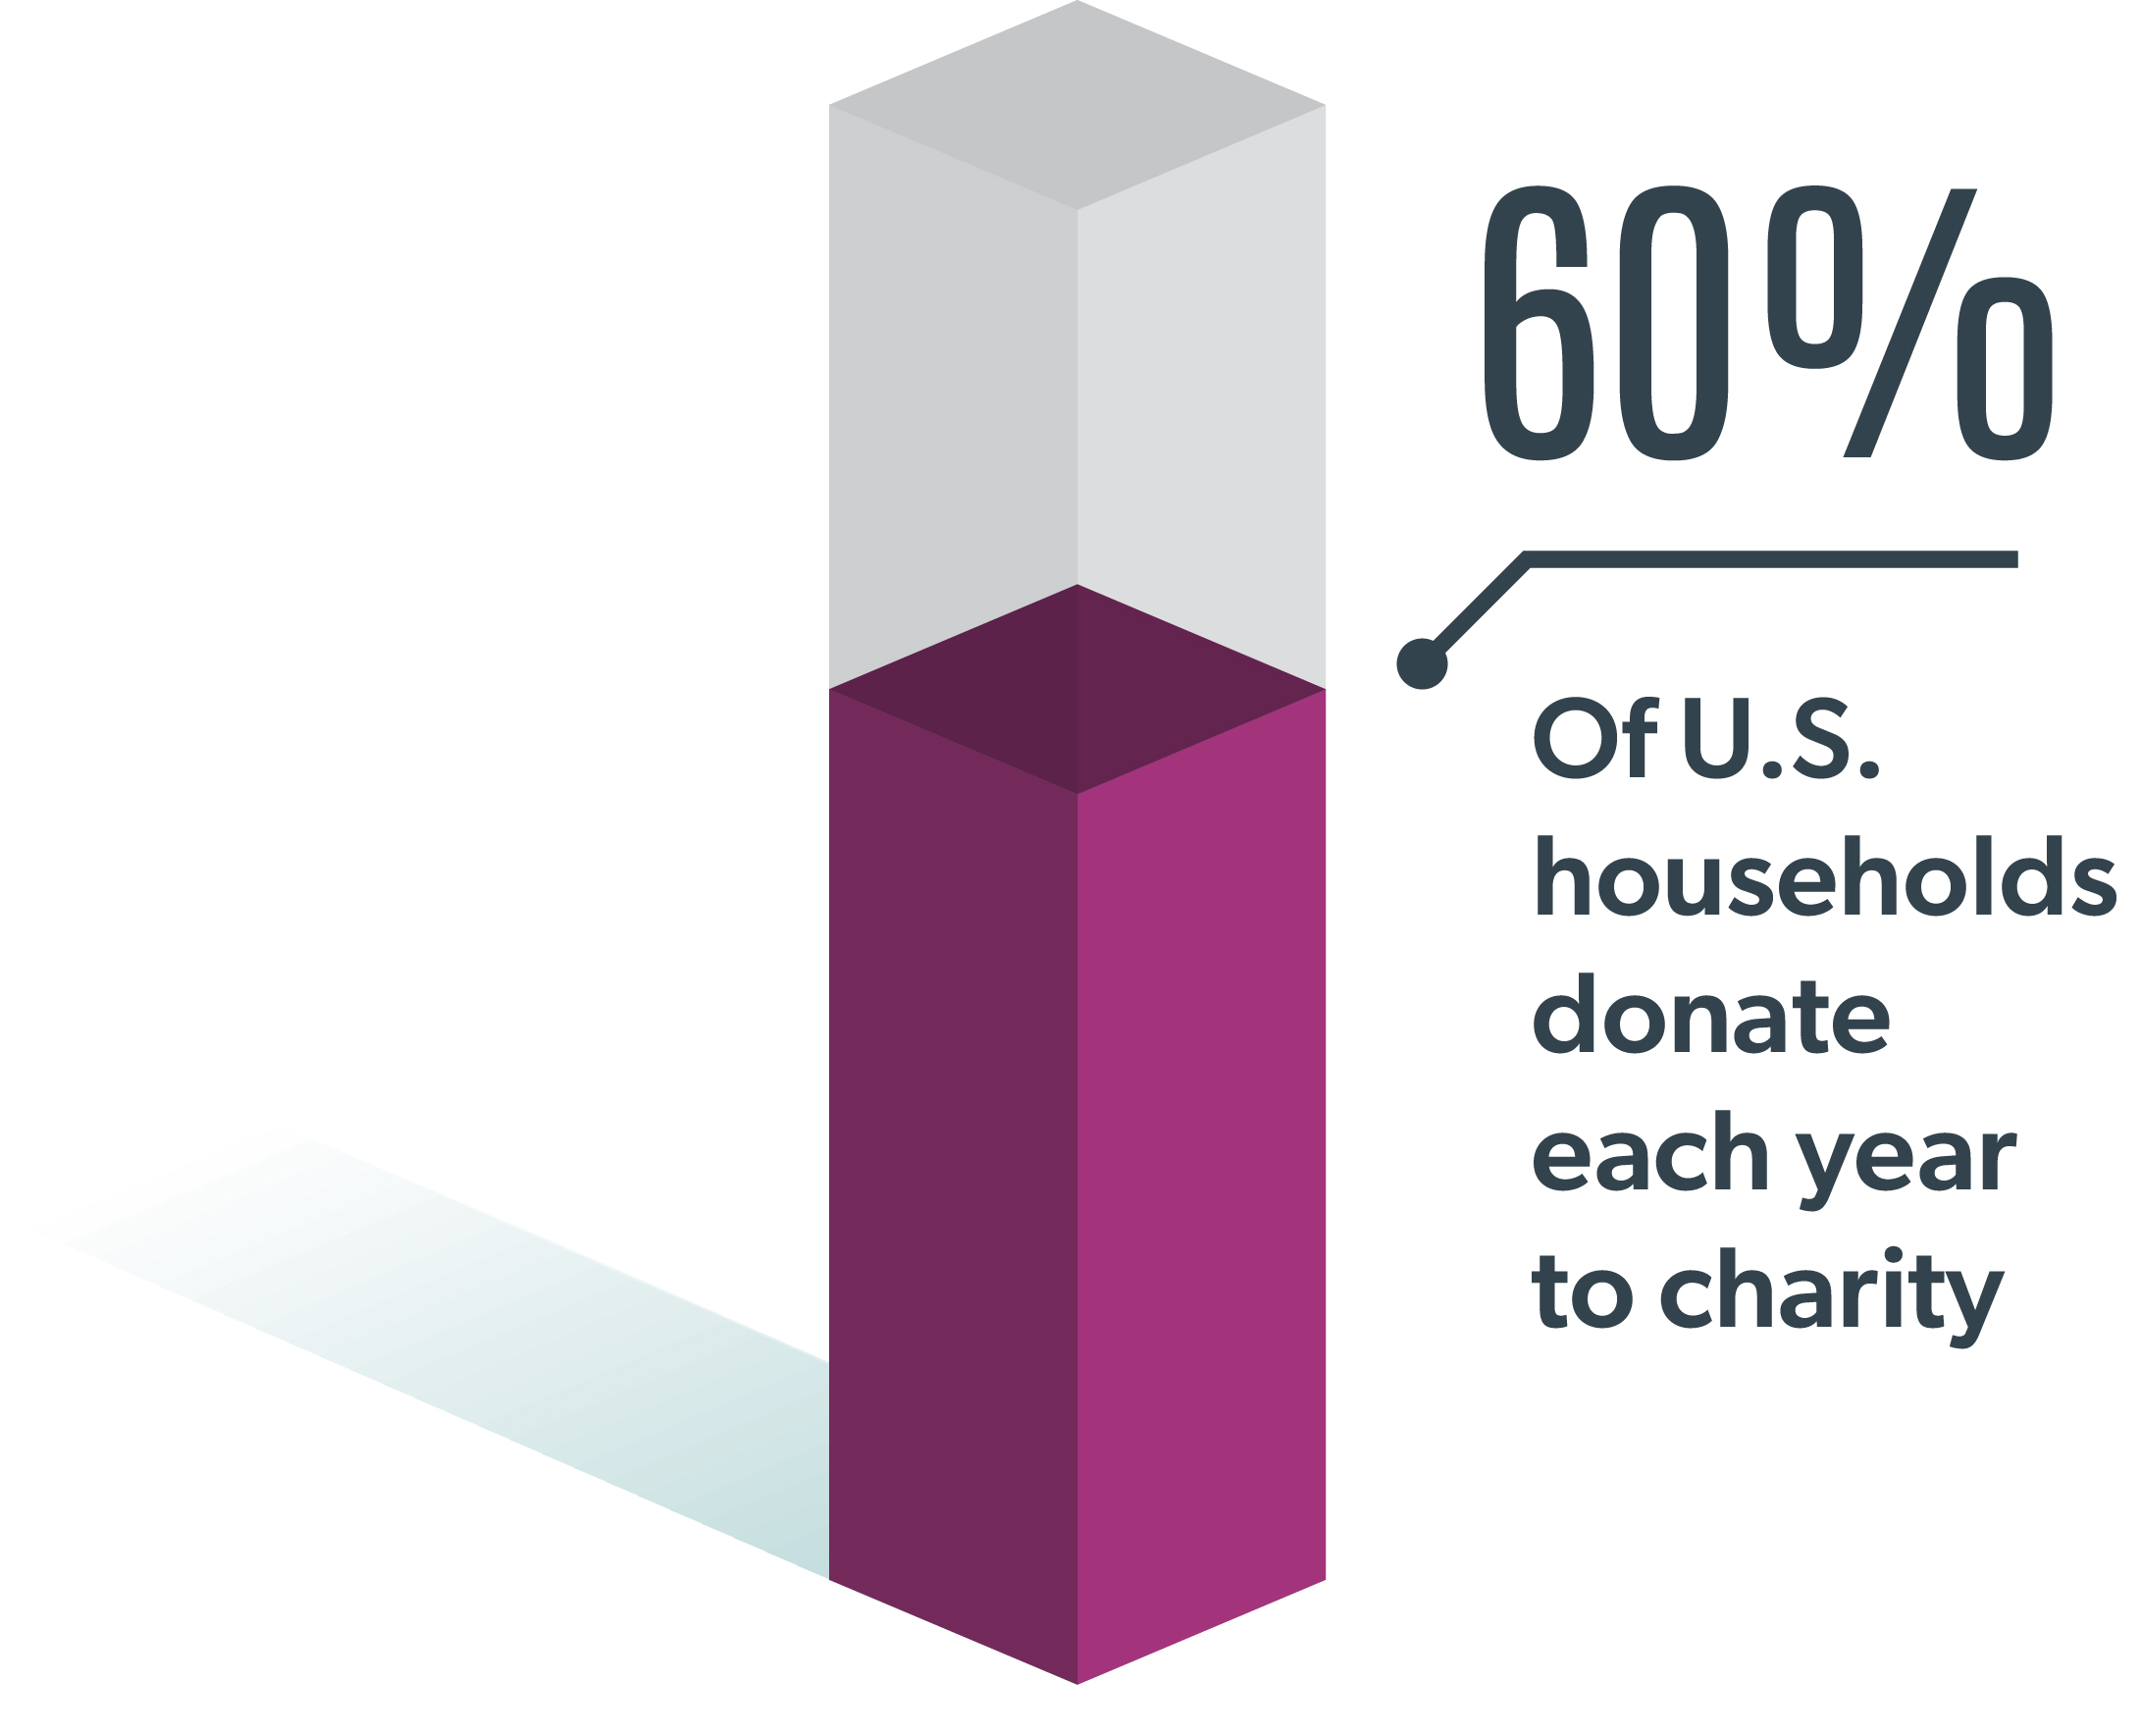 60% of U.S. households donate each year to charity